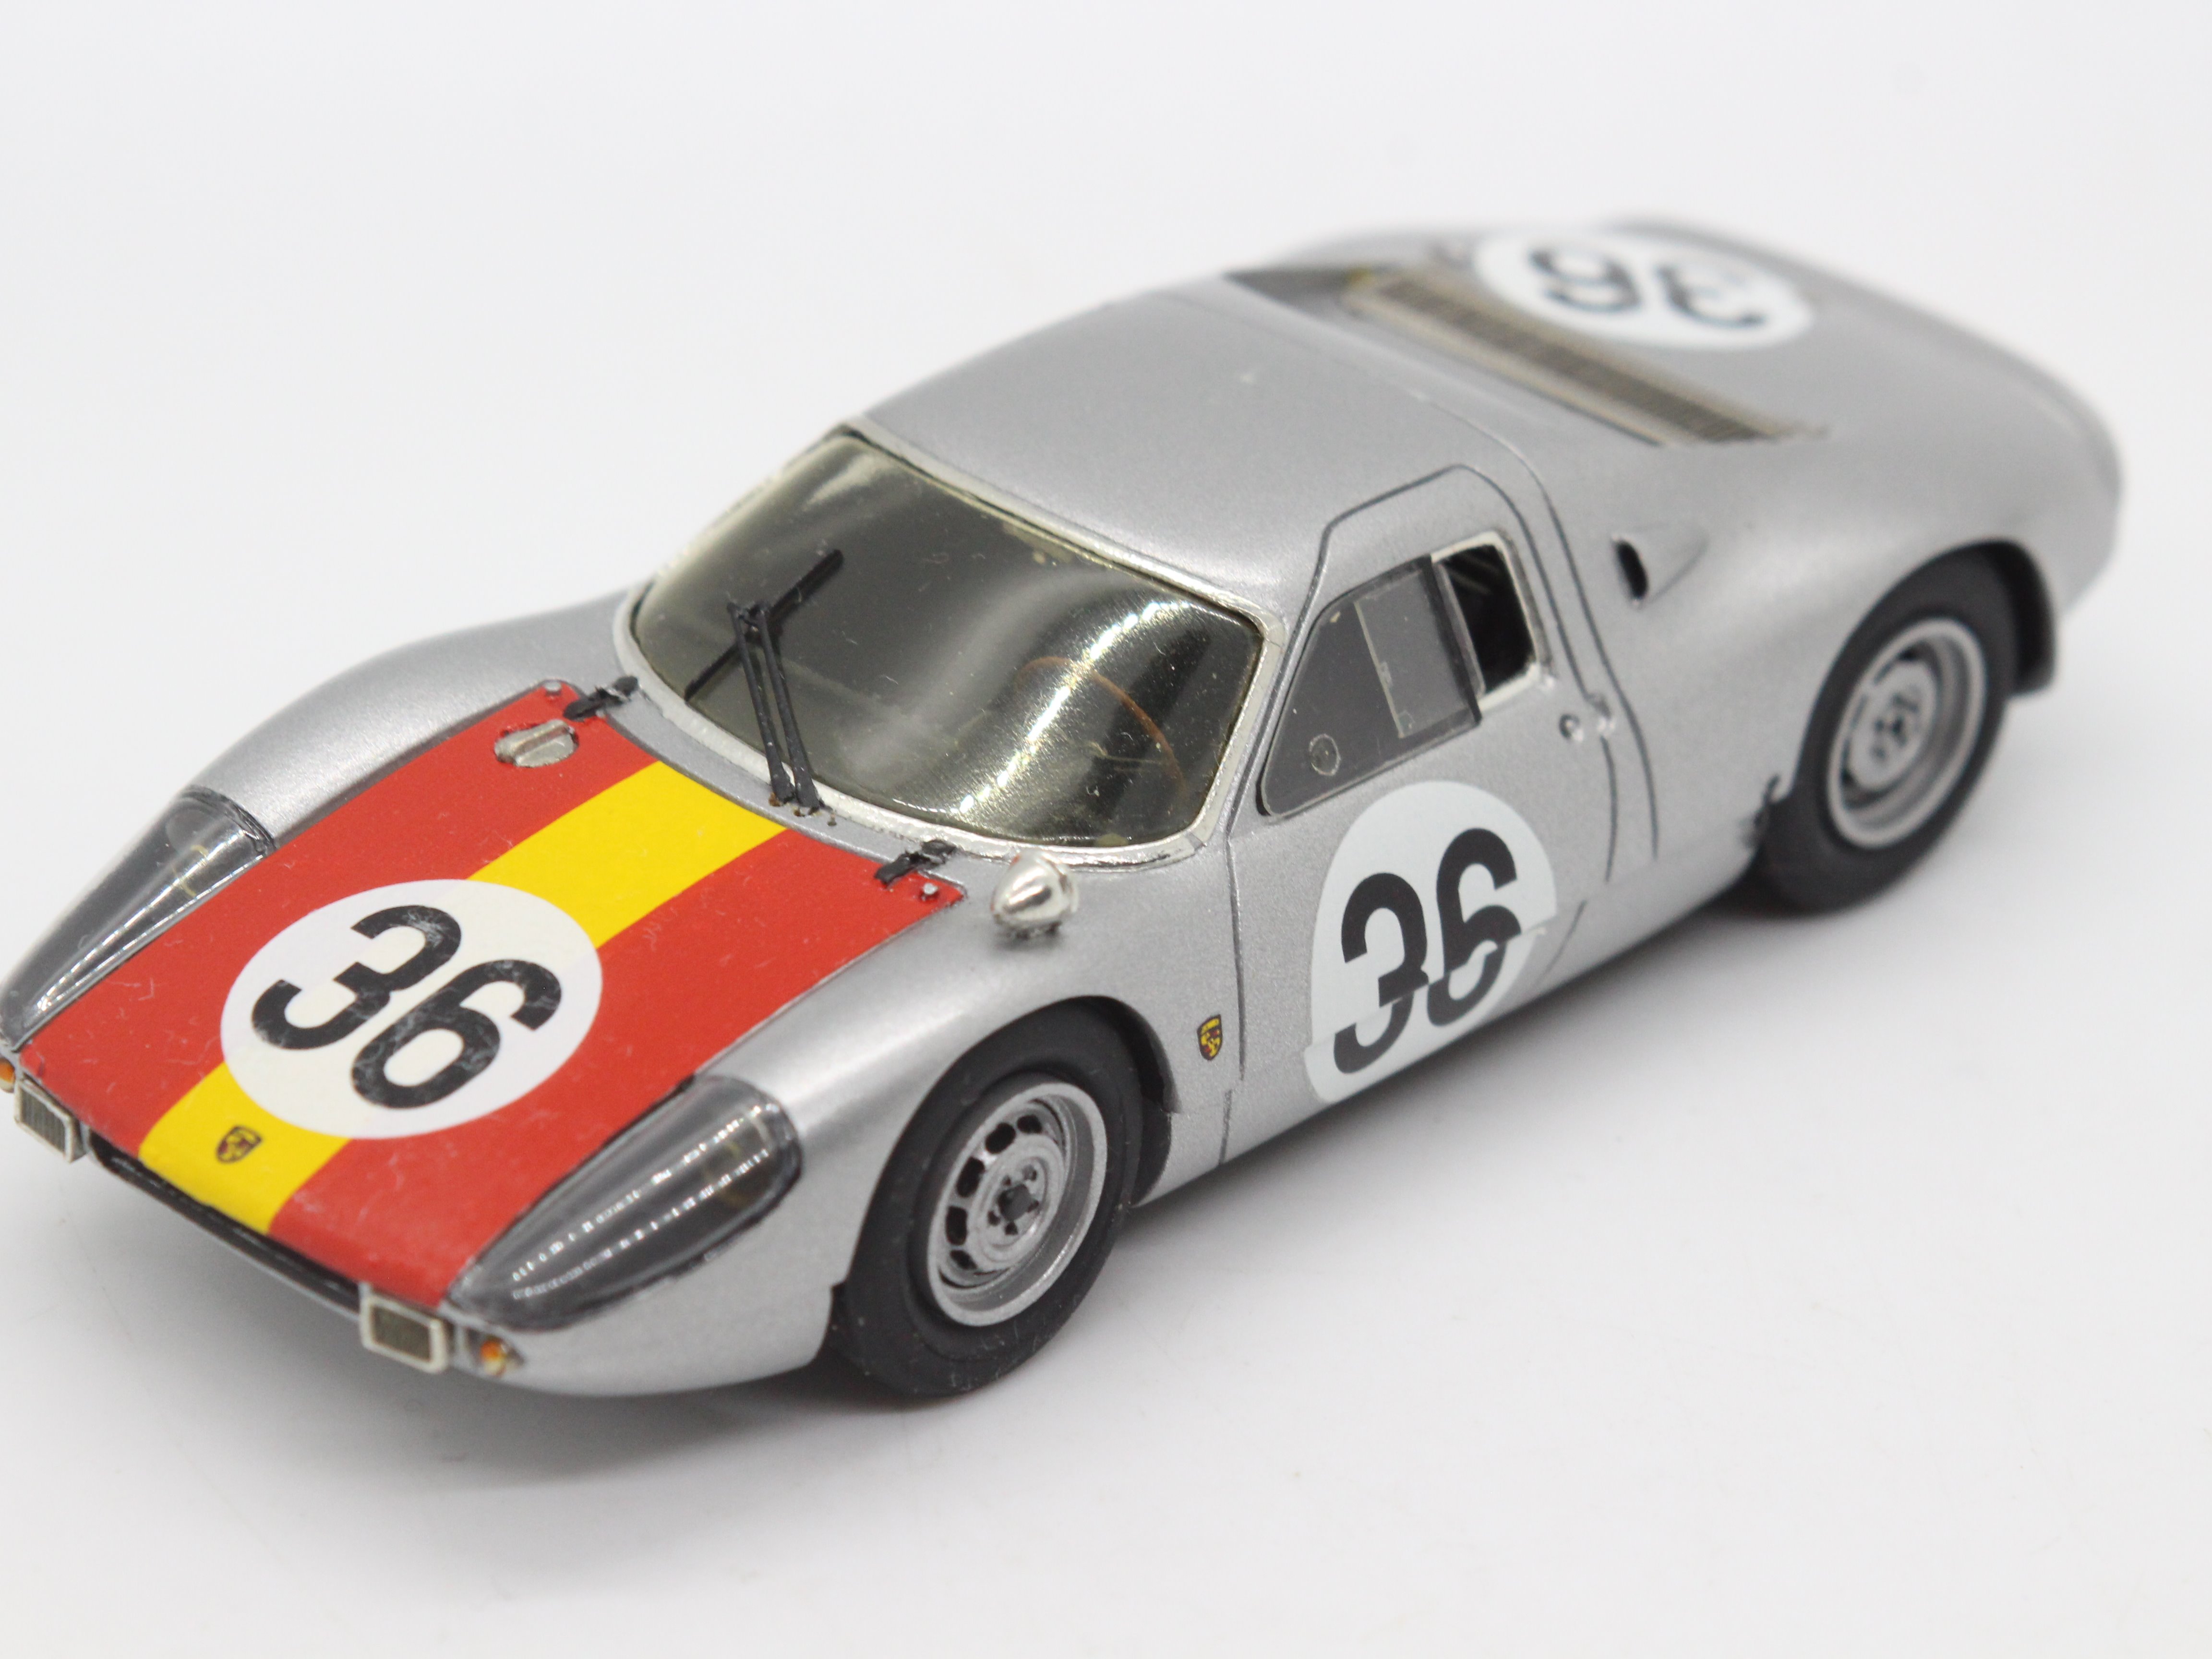 Starter Models - MPH Models - # 797 - A boxed 1:43 scale resin model Porsche 904 GTS as driven at